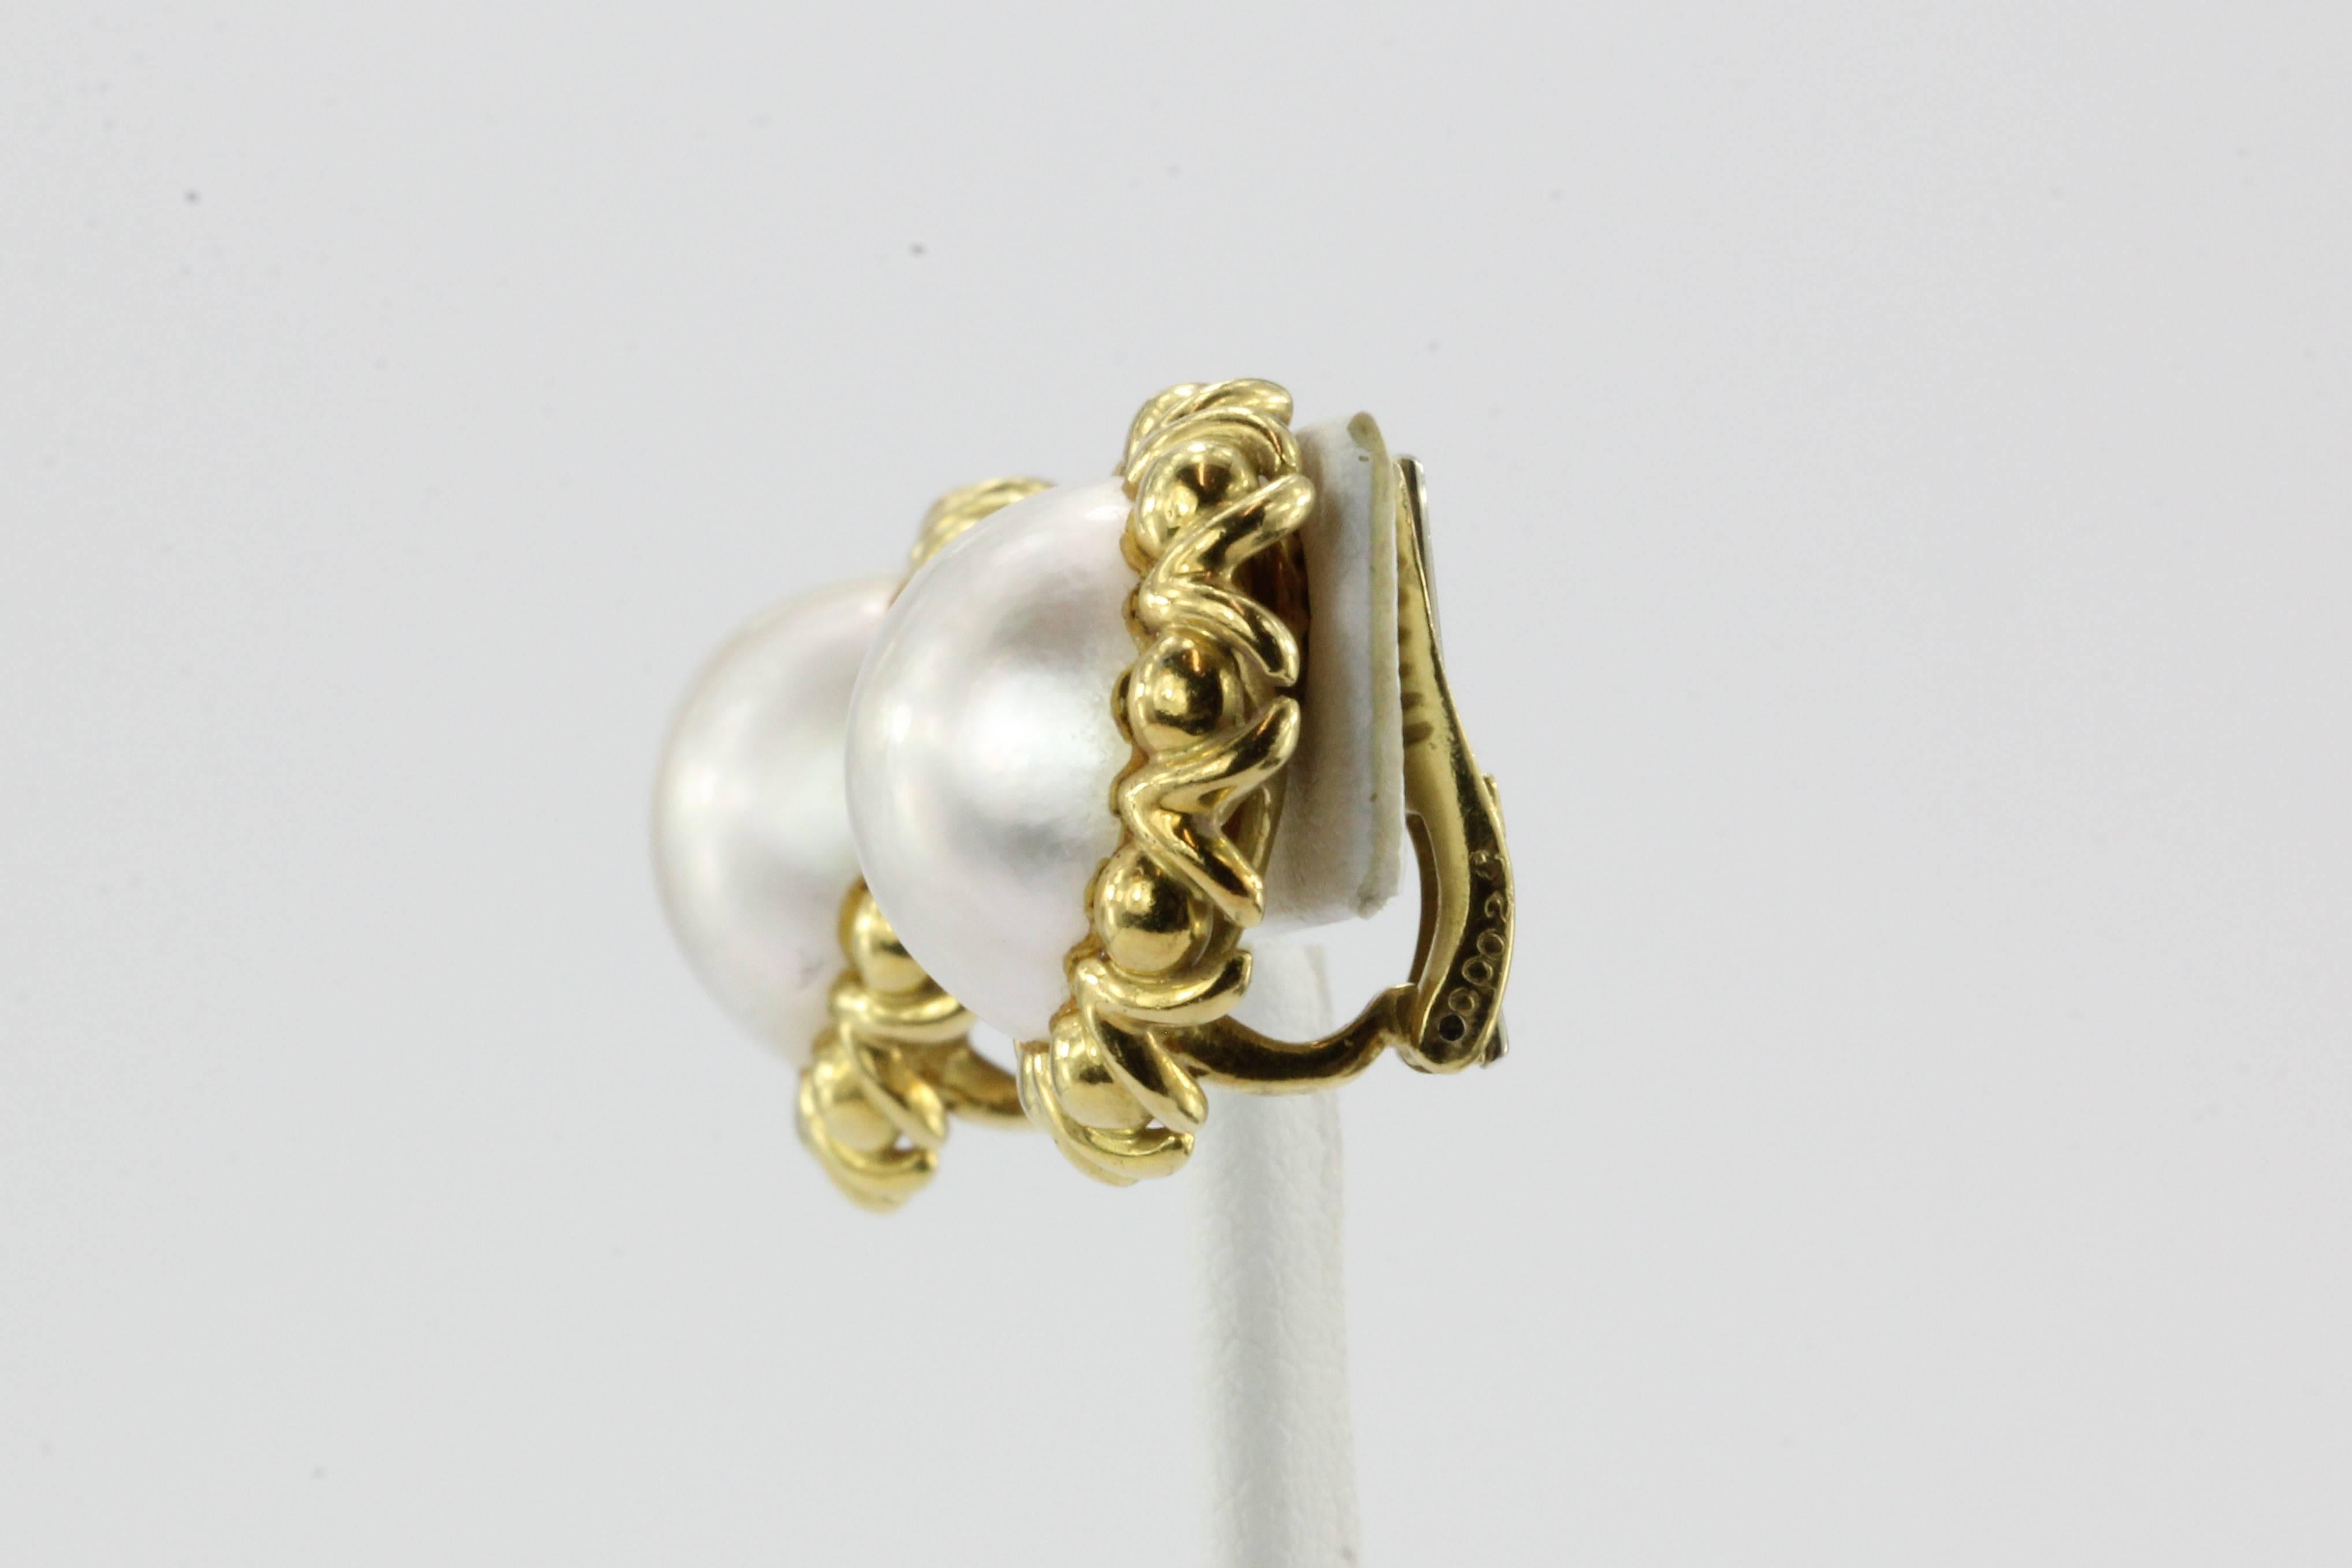 Vintage Cartier 18K Gold Mabe Pearl Clip-on Earrings

The earrings are in excellent used estate condition and ready to wear. They are both signed "Cartier 00028 18K". The earrings measure about 23mm in diameter and together they weigh a